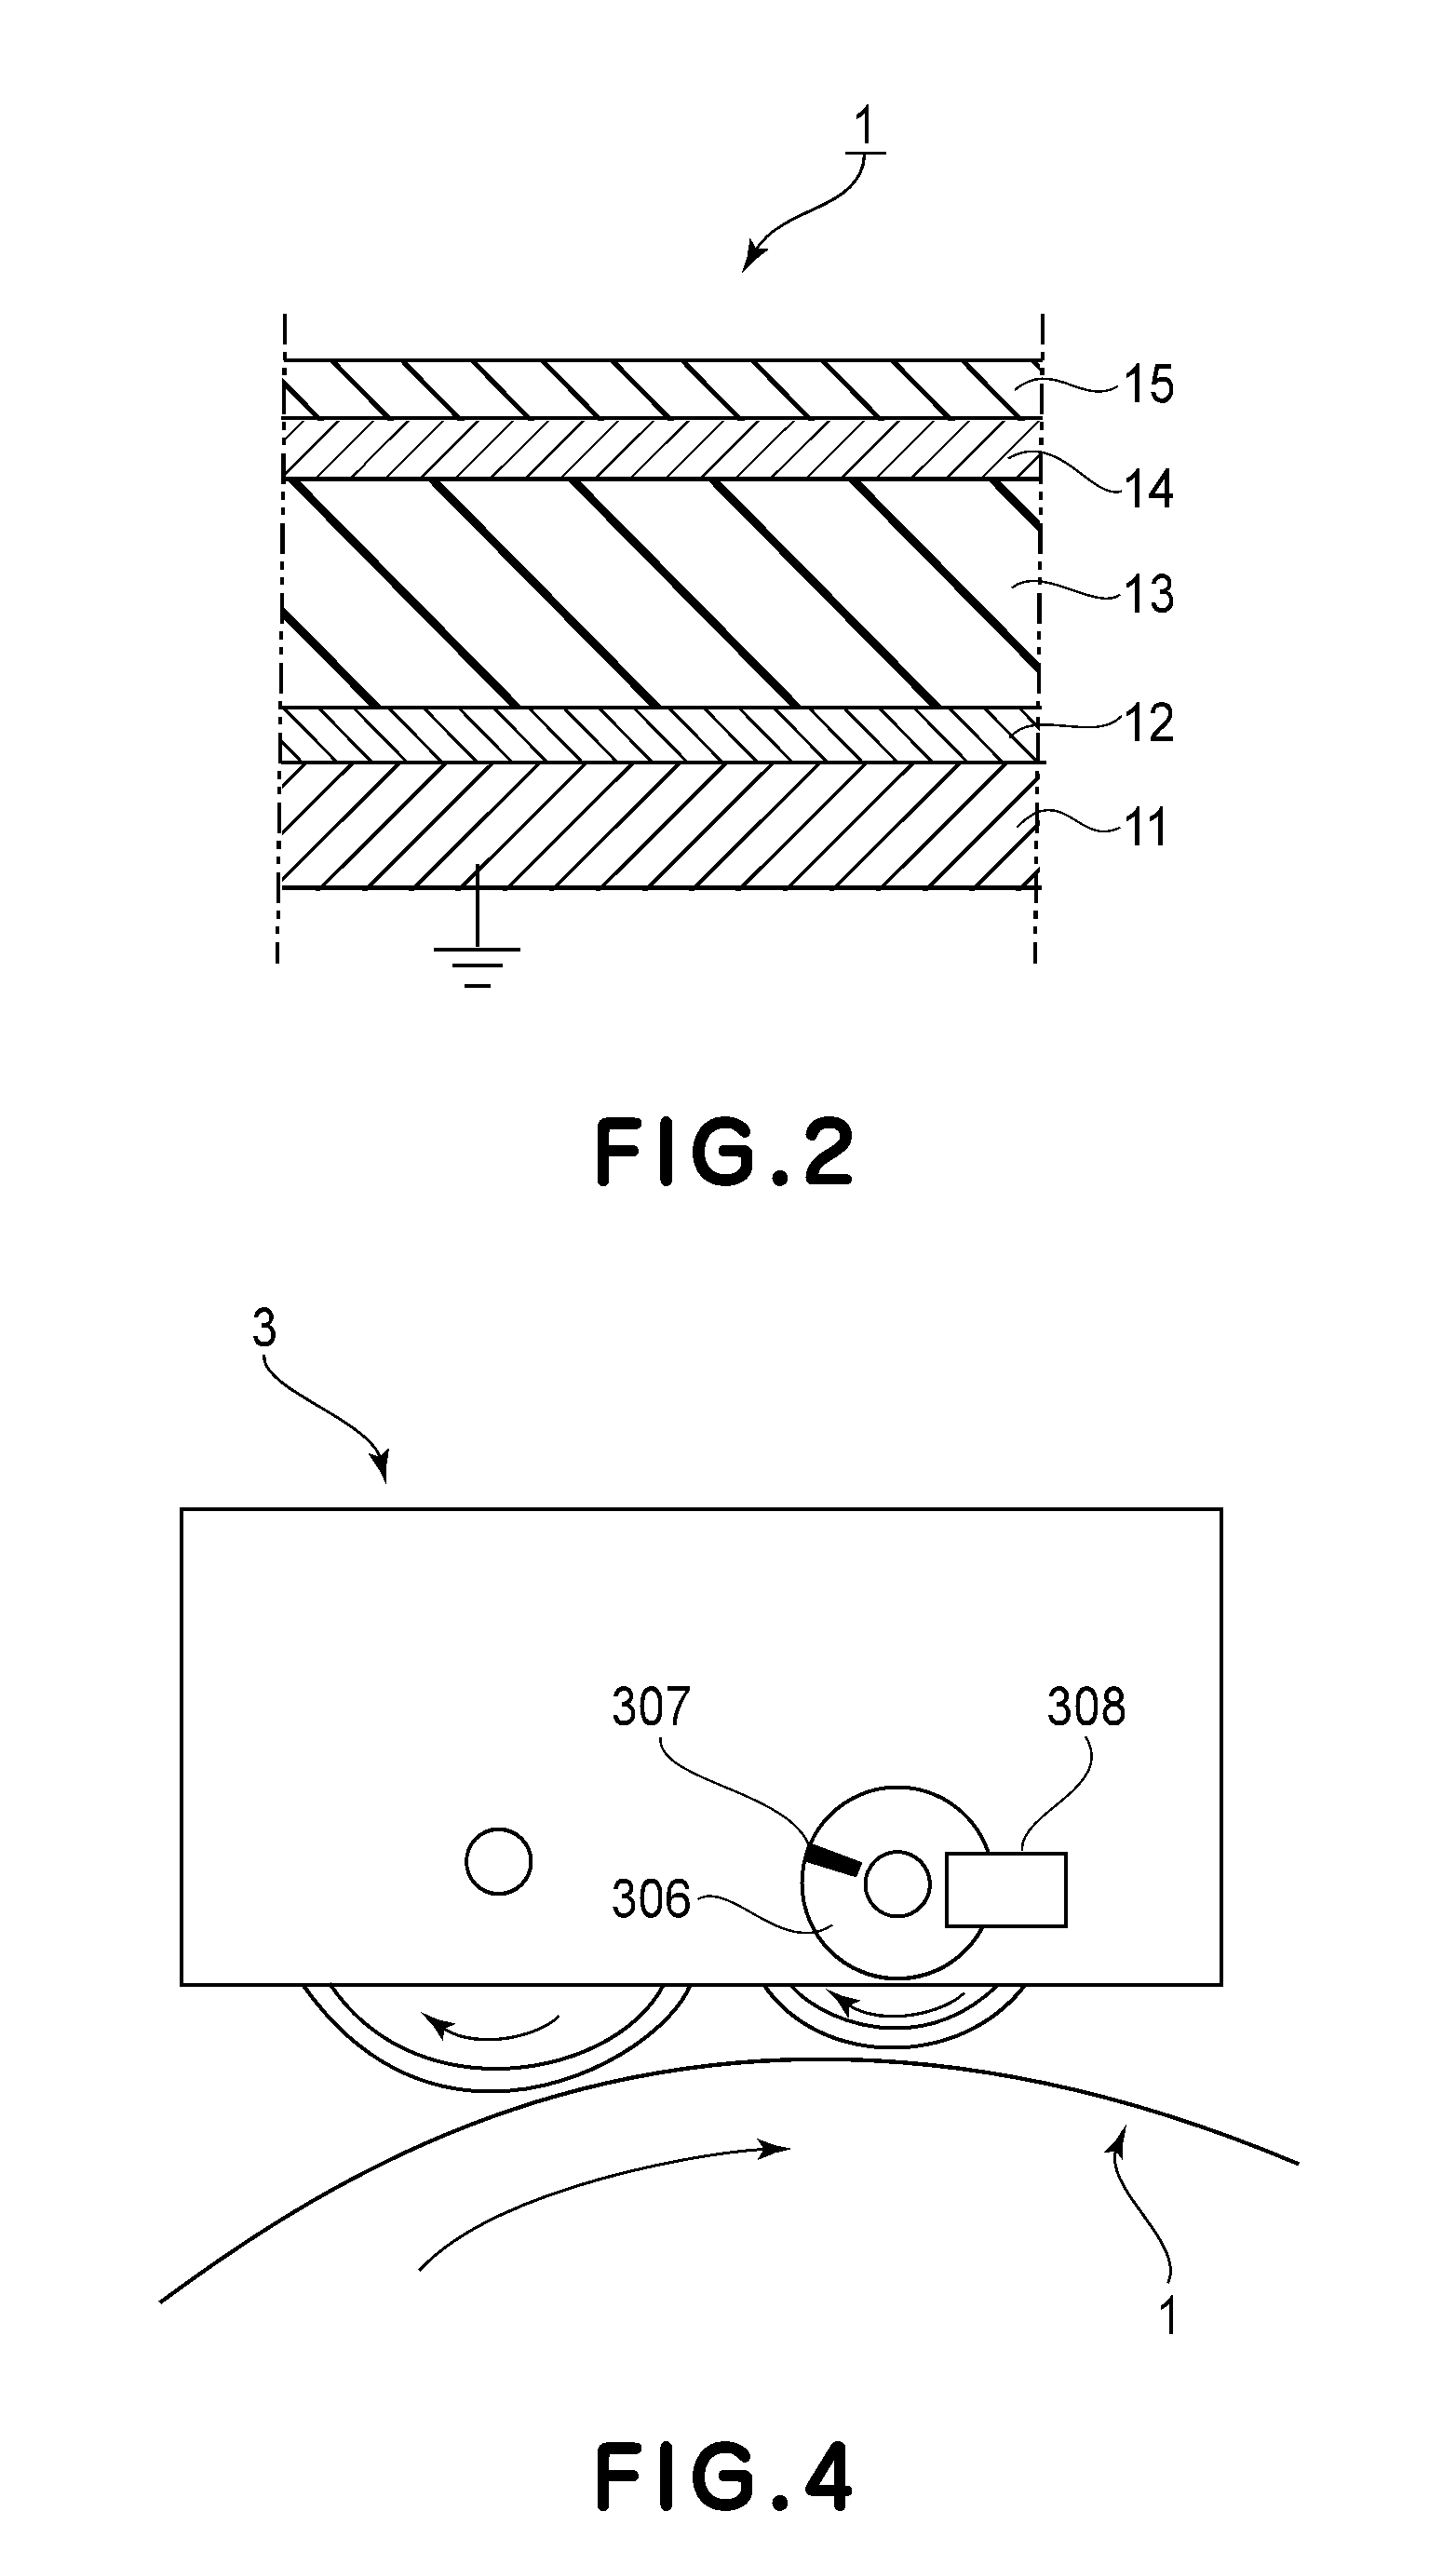 Image forming apparatus featuring control voltages applied to magnetic particle carrying members